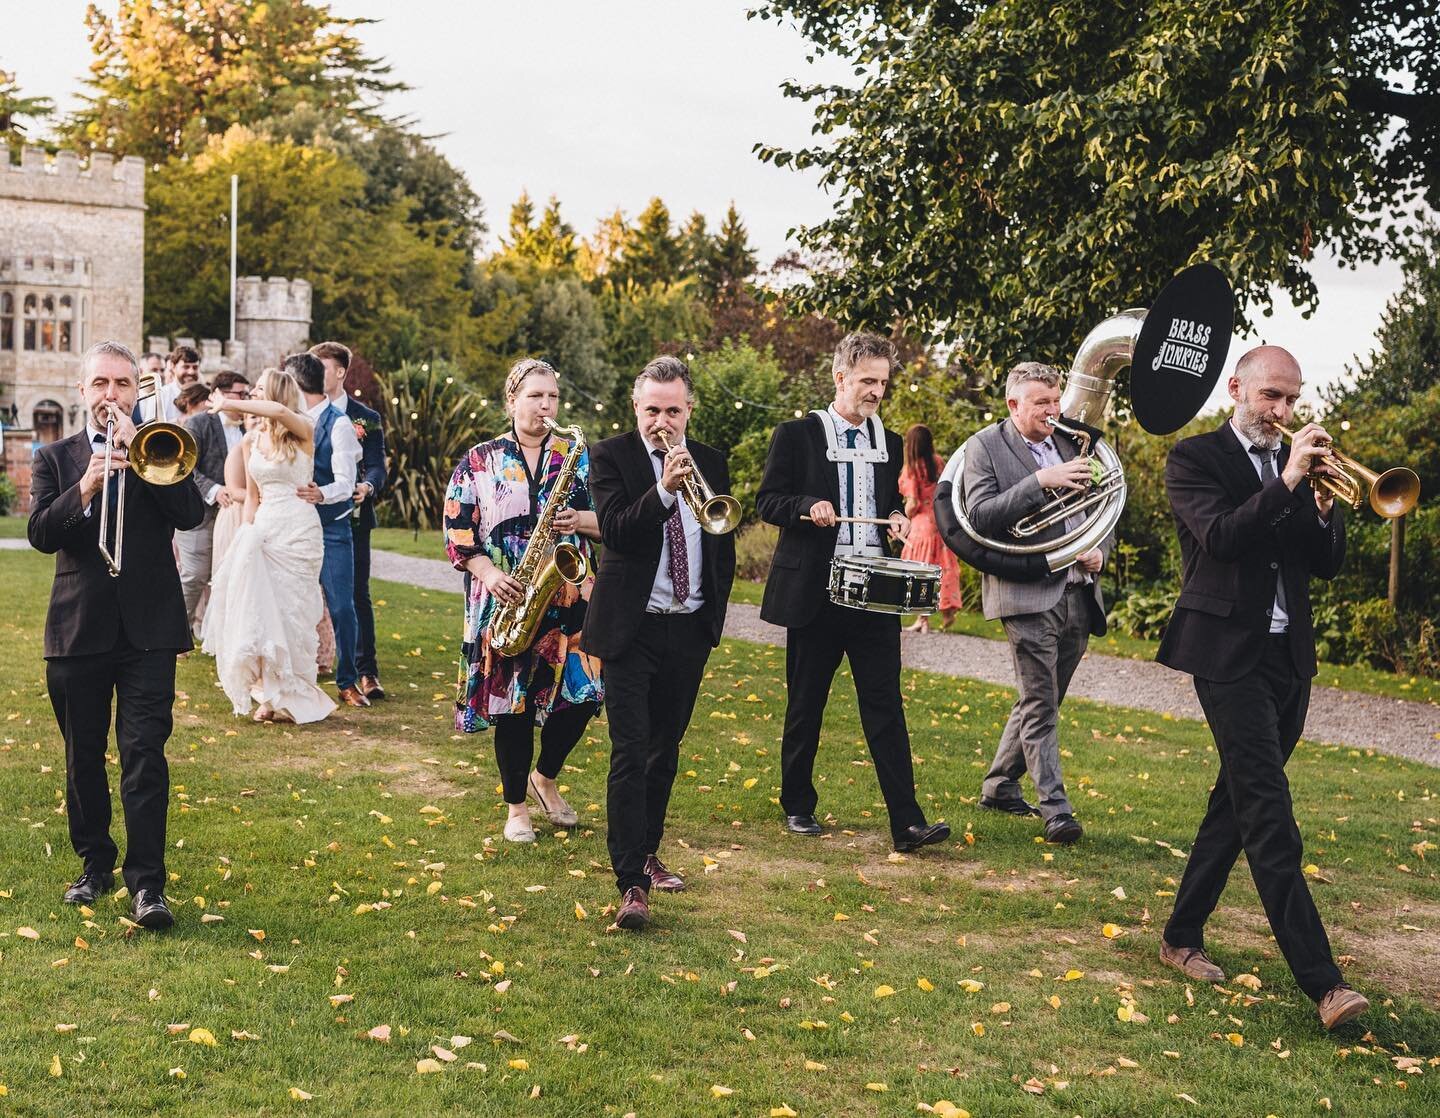 As the summer wedding season comes to a close we remember all of the wonderful venues we have performed at and beautiful couples we have celebrated with!
Conga on the lawn anyone? 

#brassjunkies #6pieceband #brassjunkiesbrassband #brassjunkiesparade